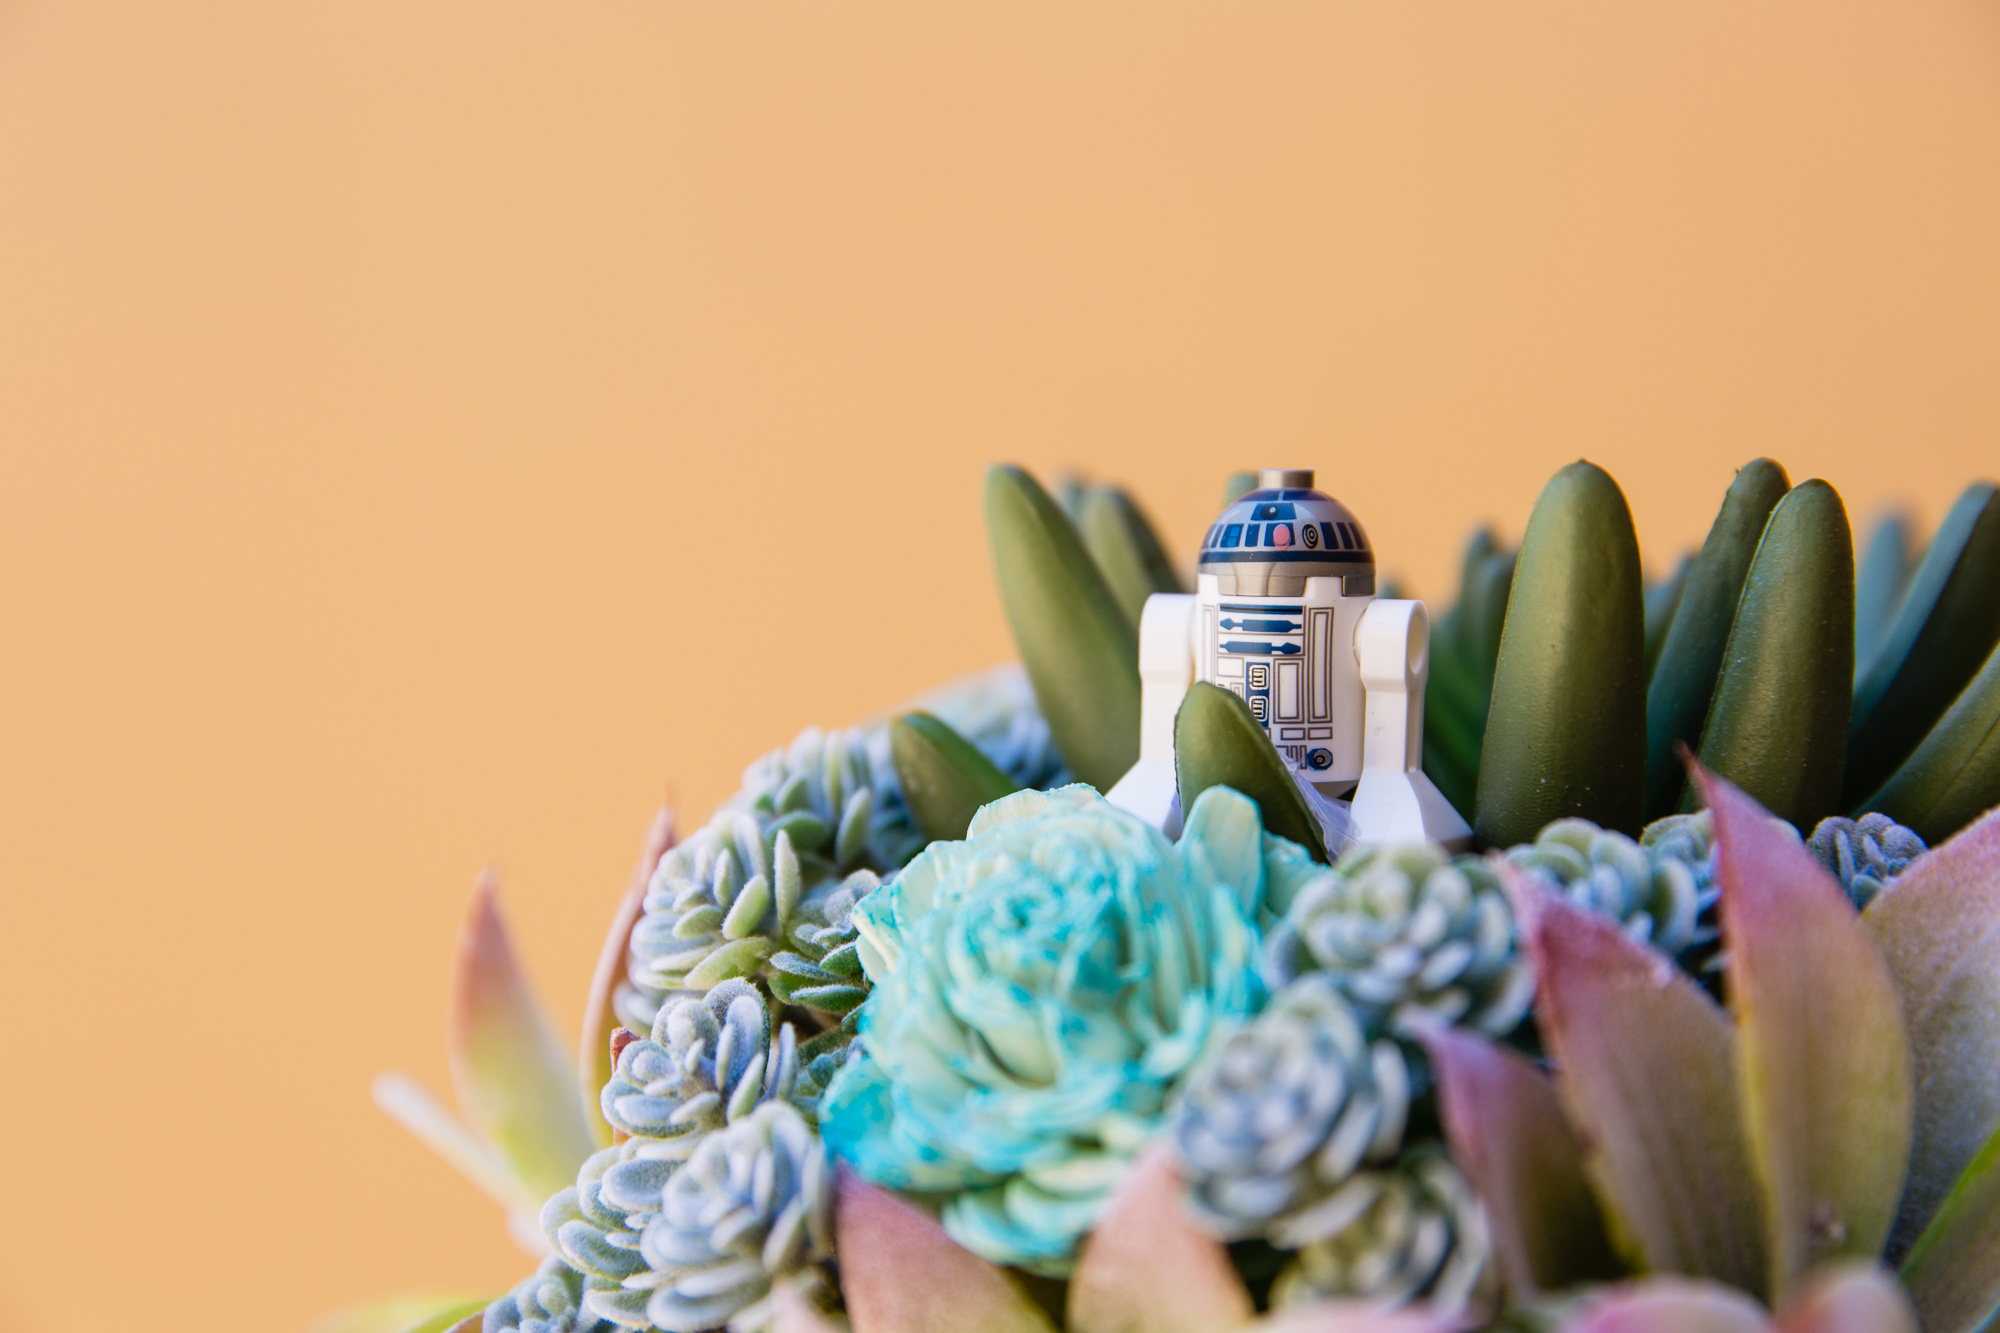 R2D2 in a wood flower and succulent bouquet at a Star Wars themed wedding by Arizona wedding photographer PMA Photography.